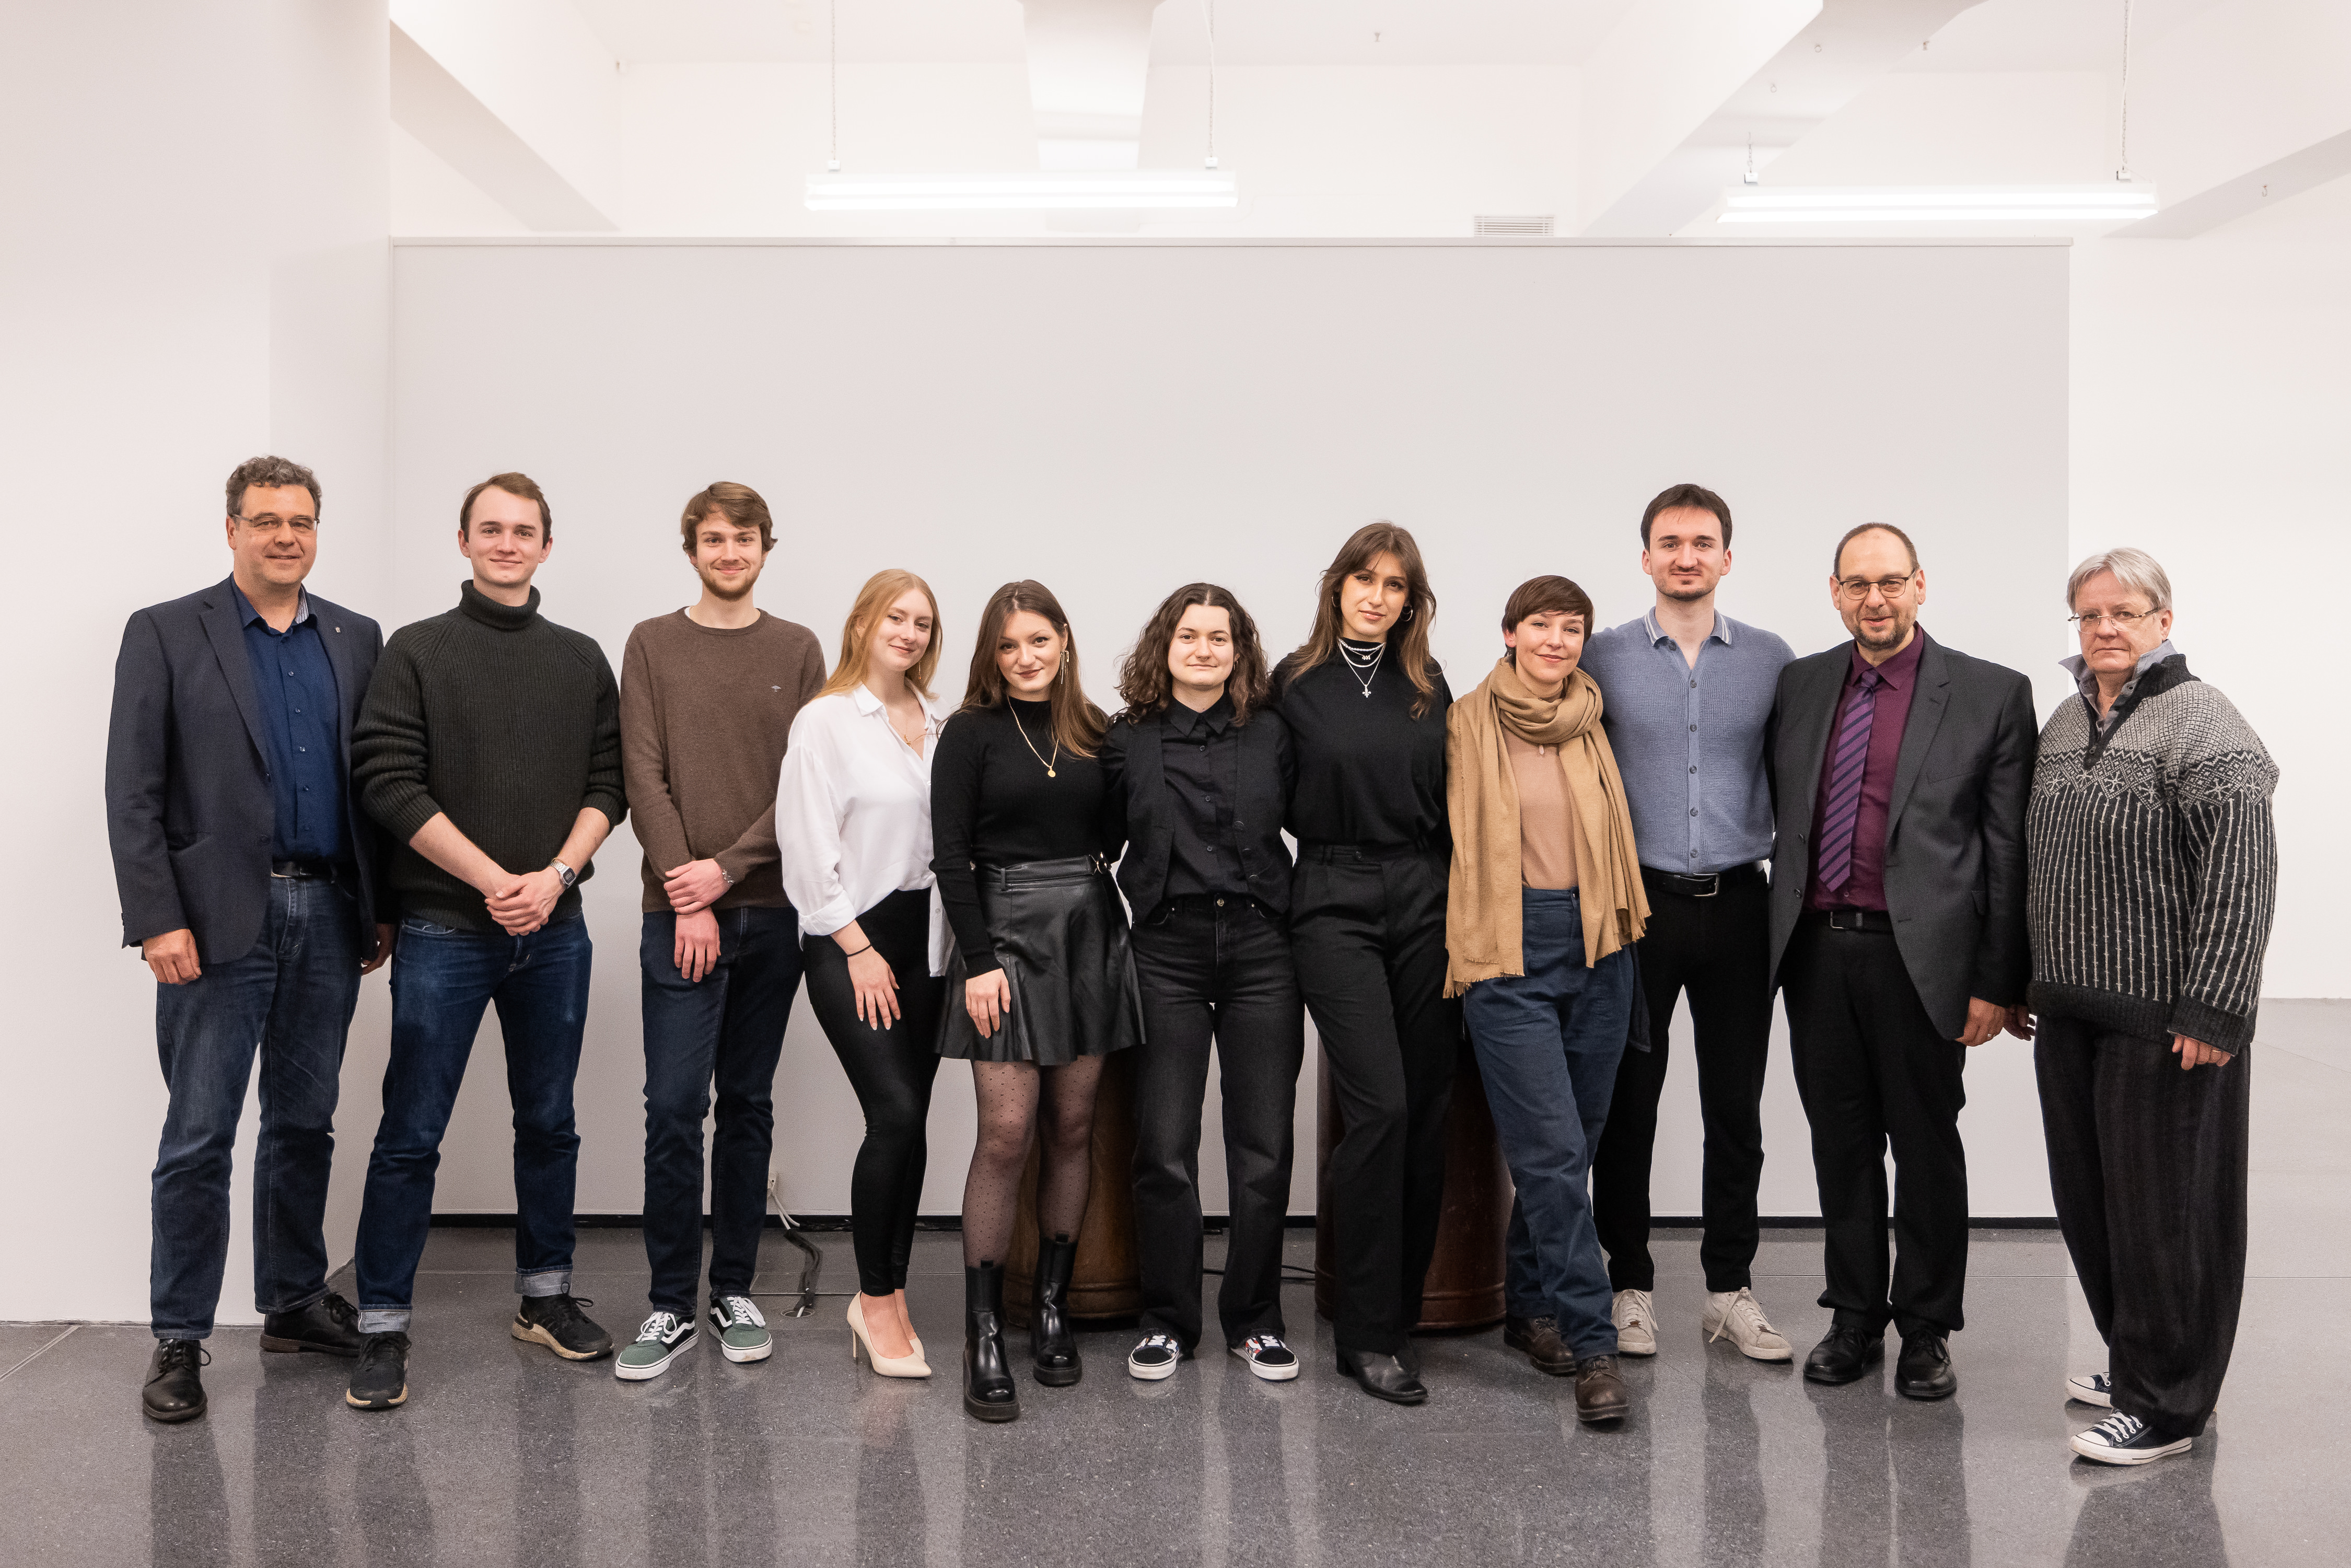 Group photo of the participating artists, Prof. Welzel, Prof. Kockmann and Mr. Hester